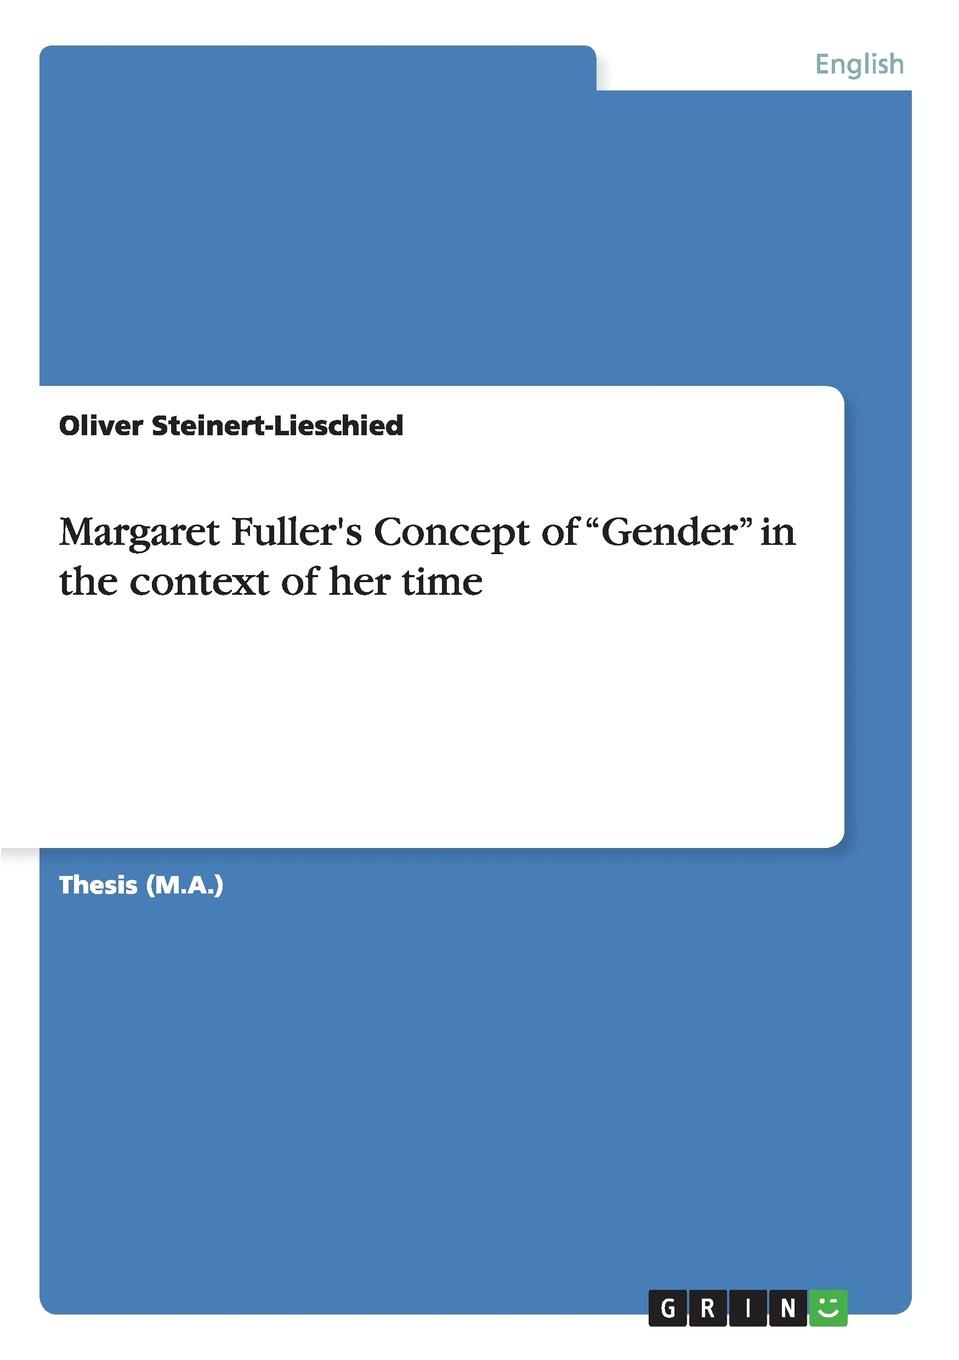 фото Margaret Fuller.s Concept of "Gender" in the context of her time